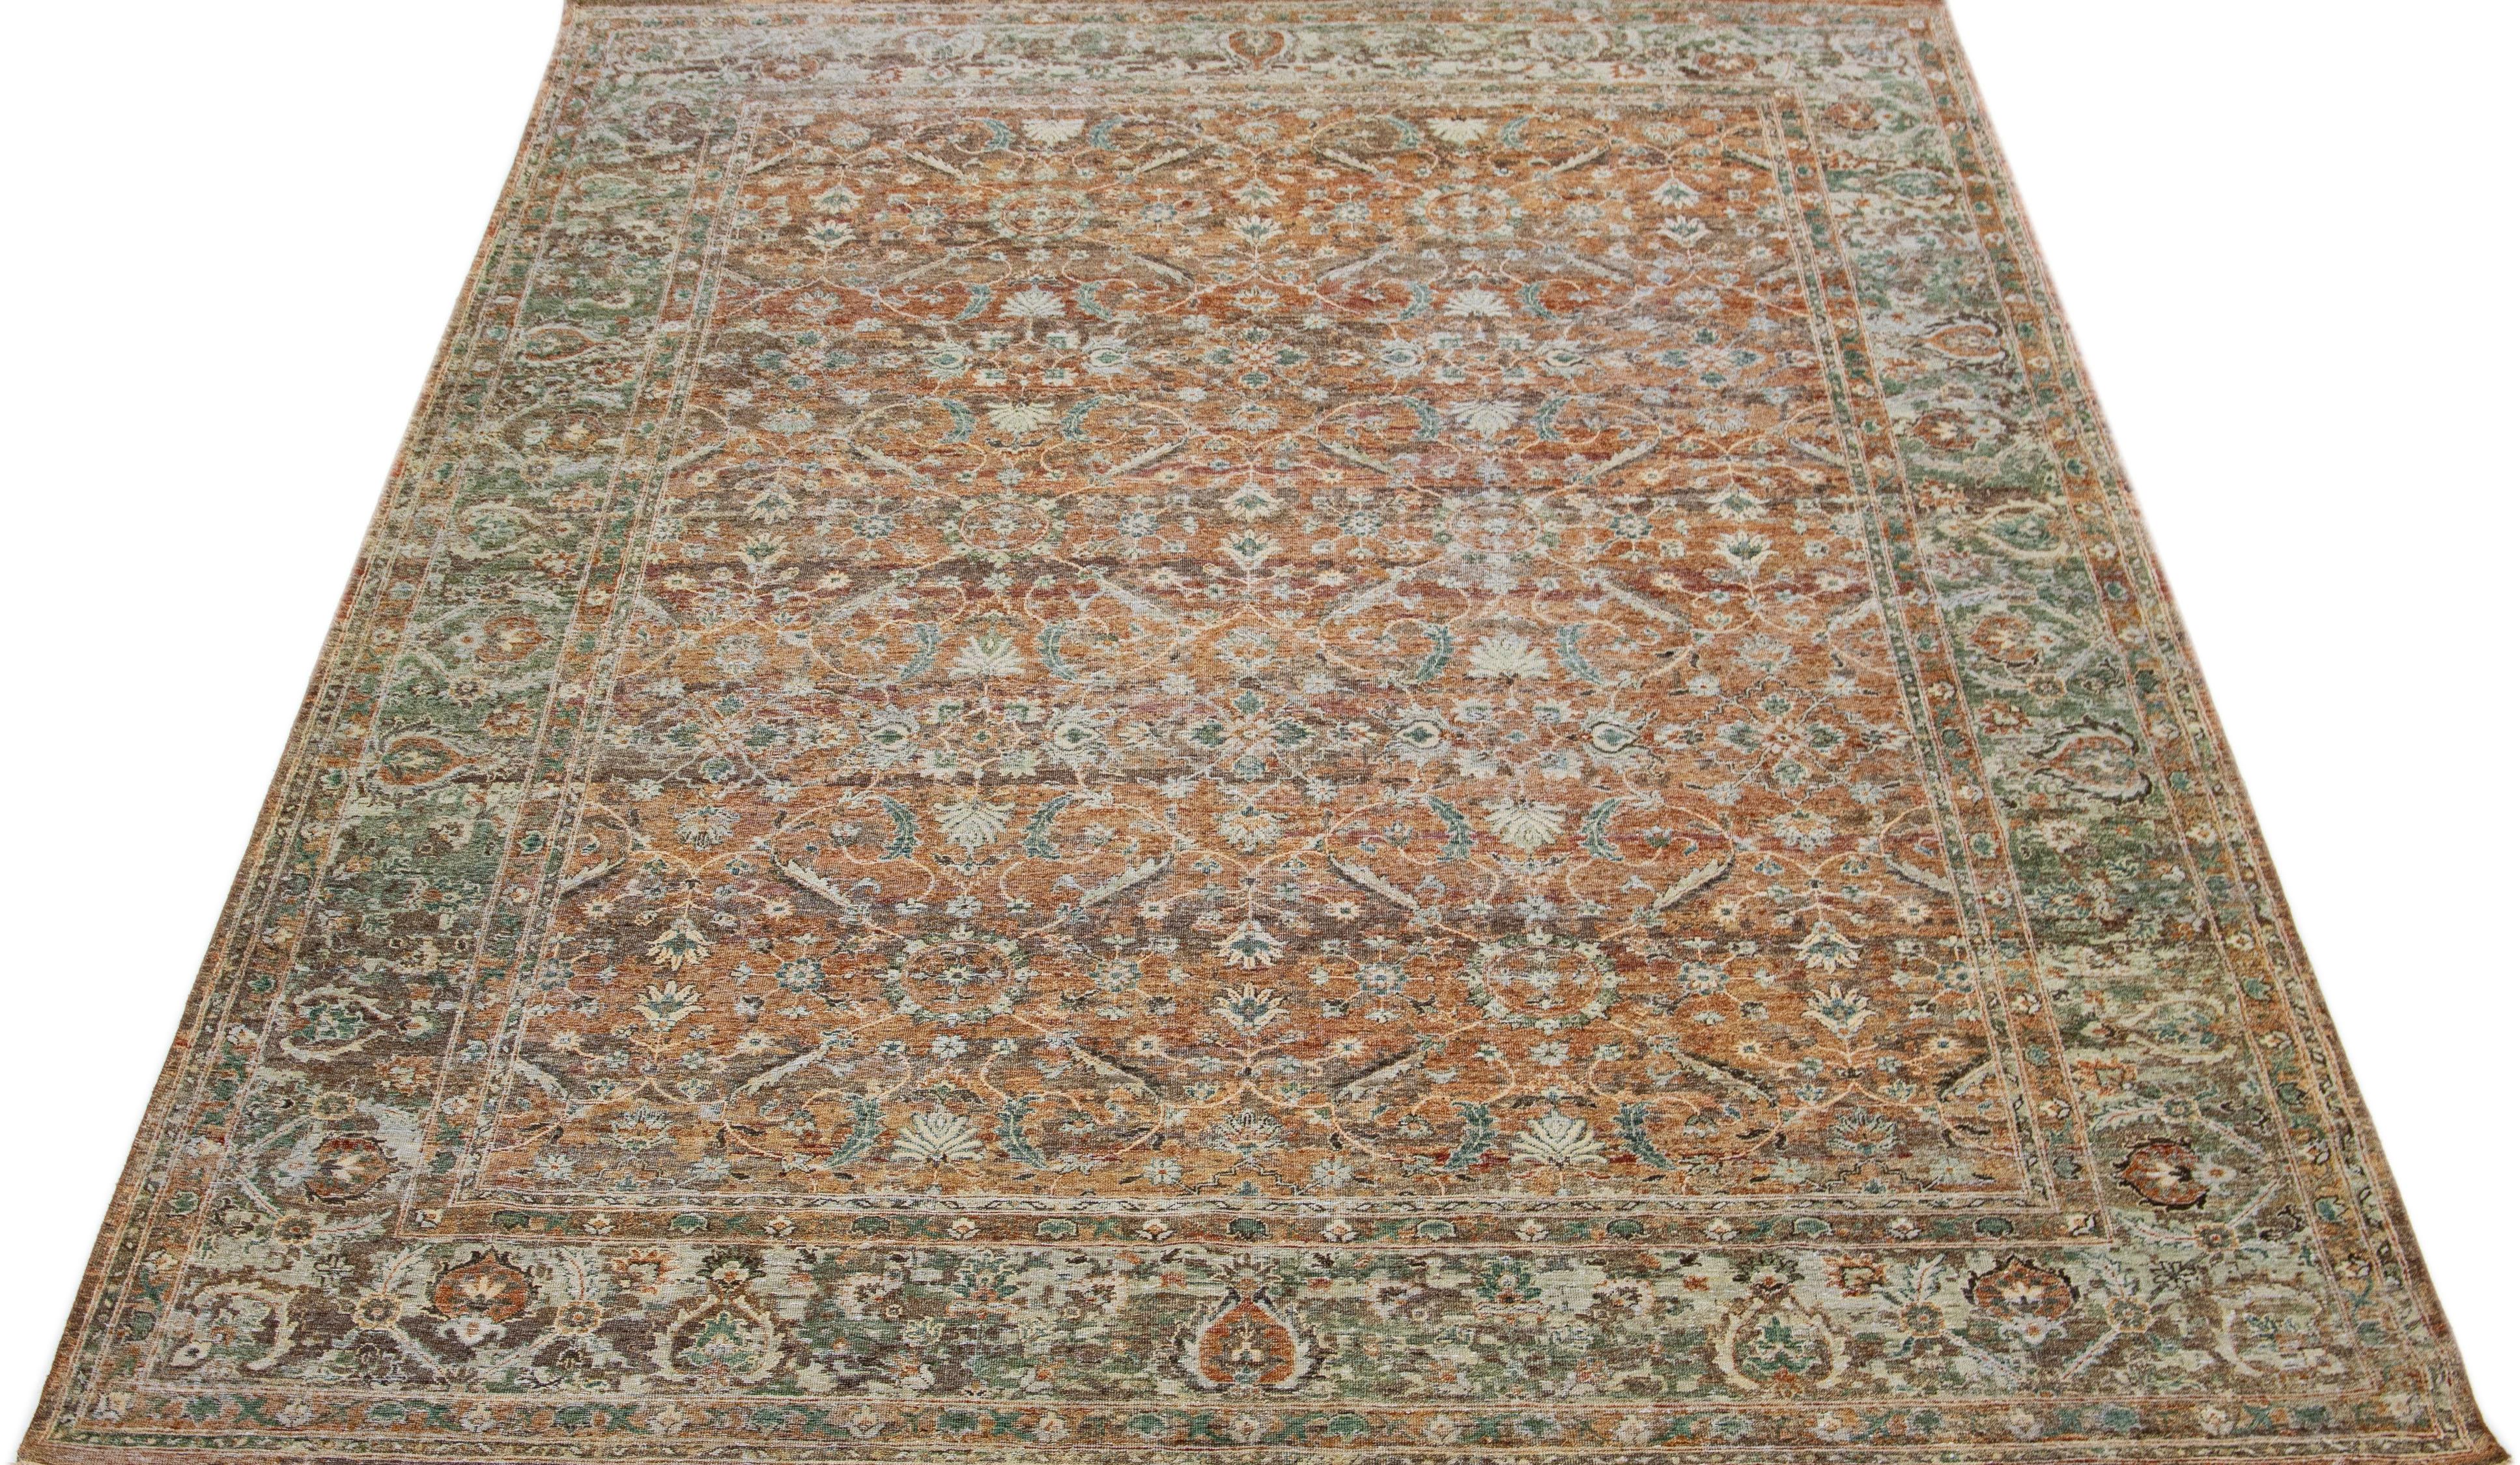 The Apadana Artisan line offers an innovative way to inject a regal old-world charm into any space. Every rug from this line has been dutifully crafted by hand and exhibits a timelessly unique aesthetic. The rug features a beautiful floral pattern